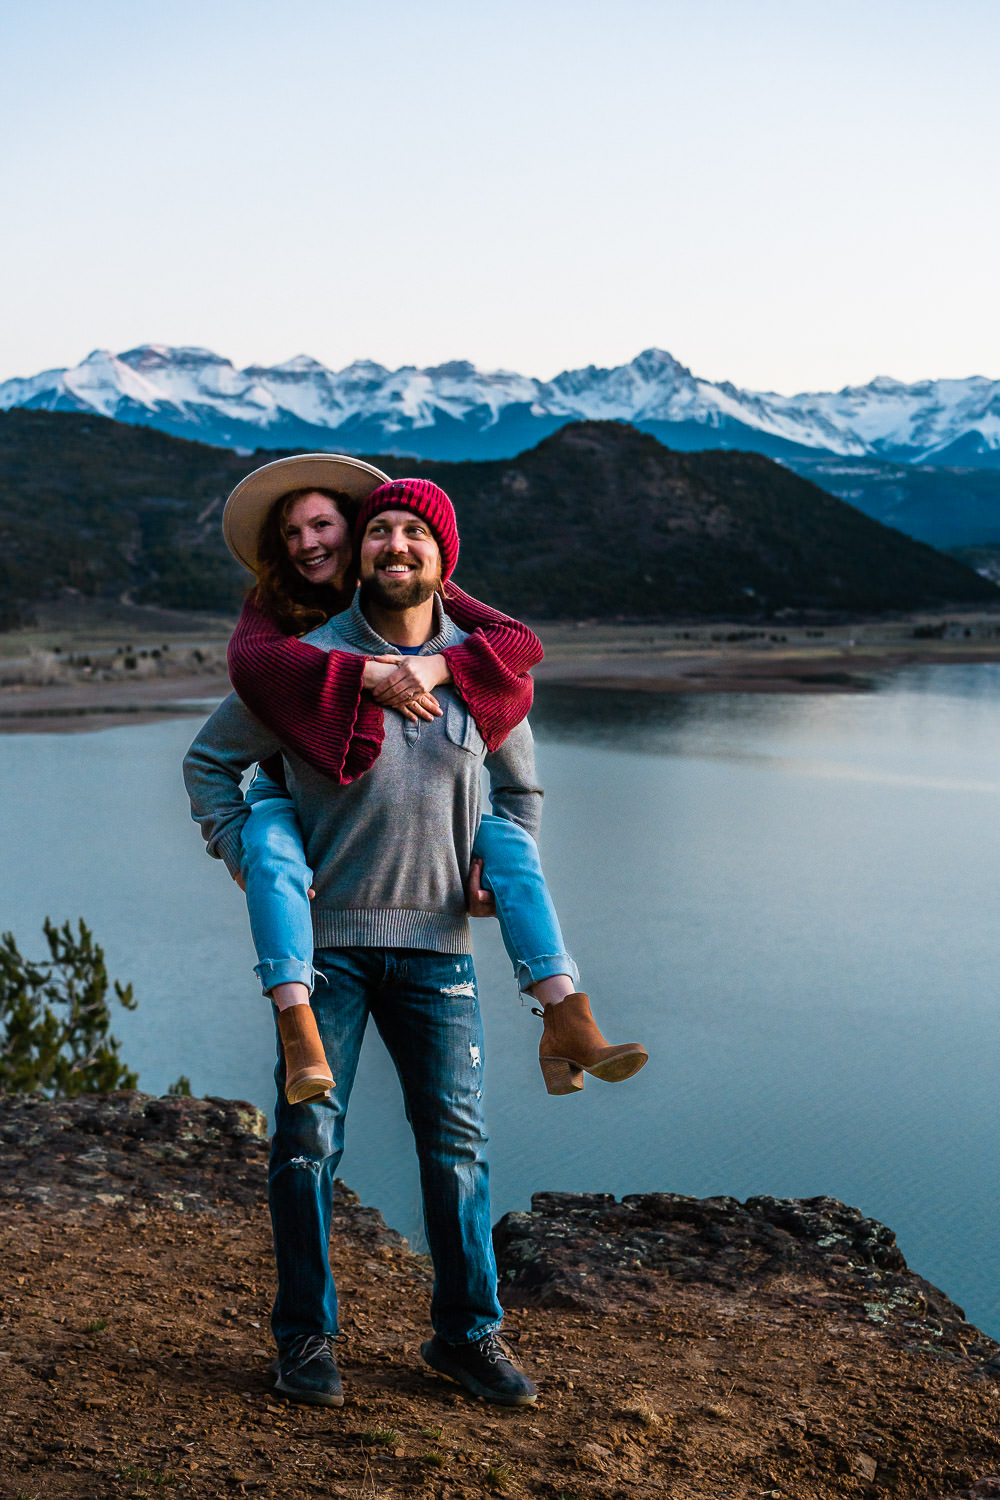 Colorado Elopement Photographers Meg and Kevin exploring a mountain lake during sunset